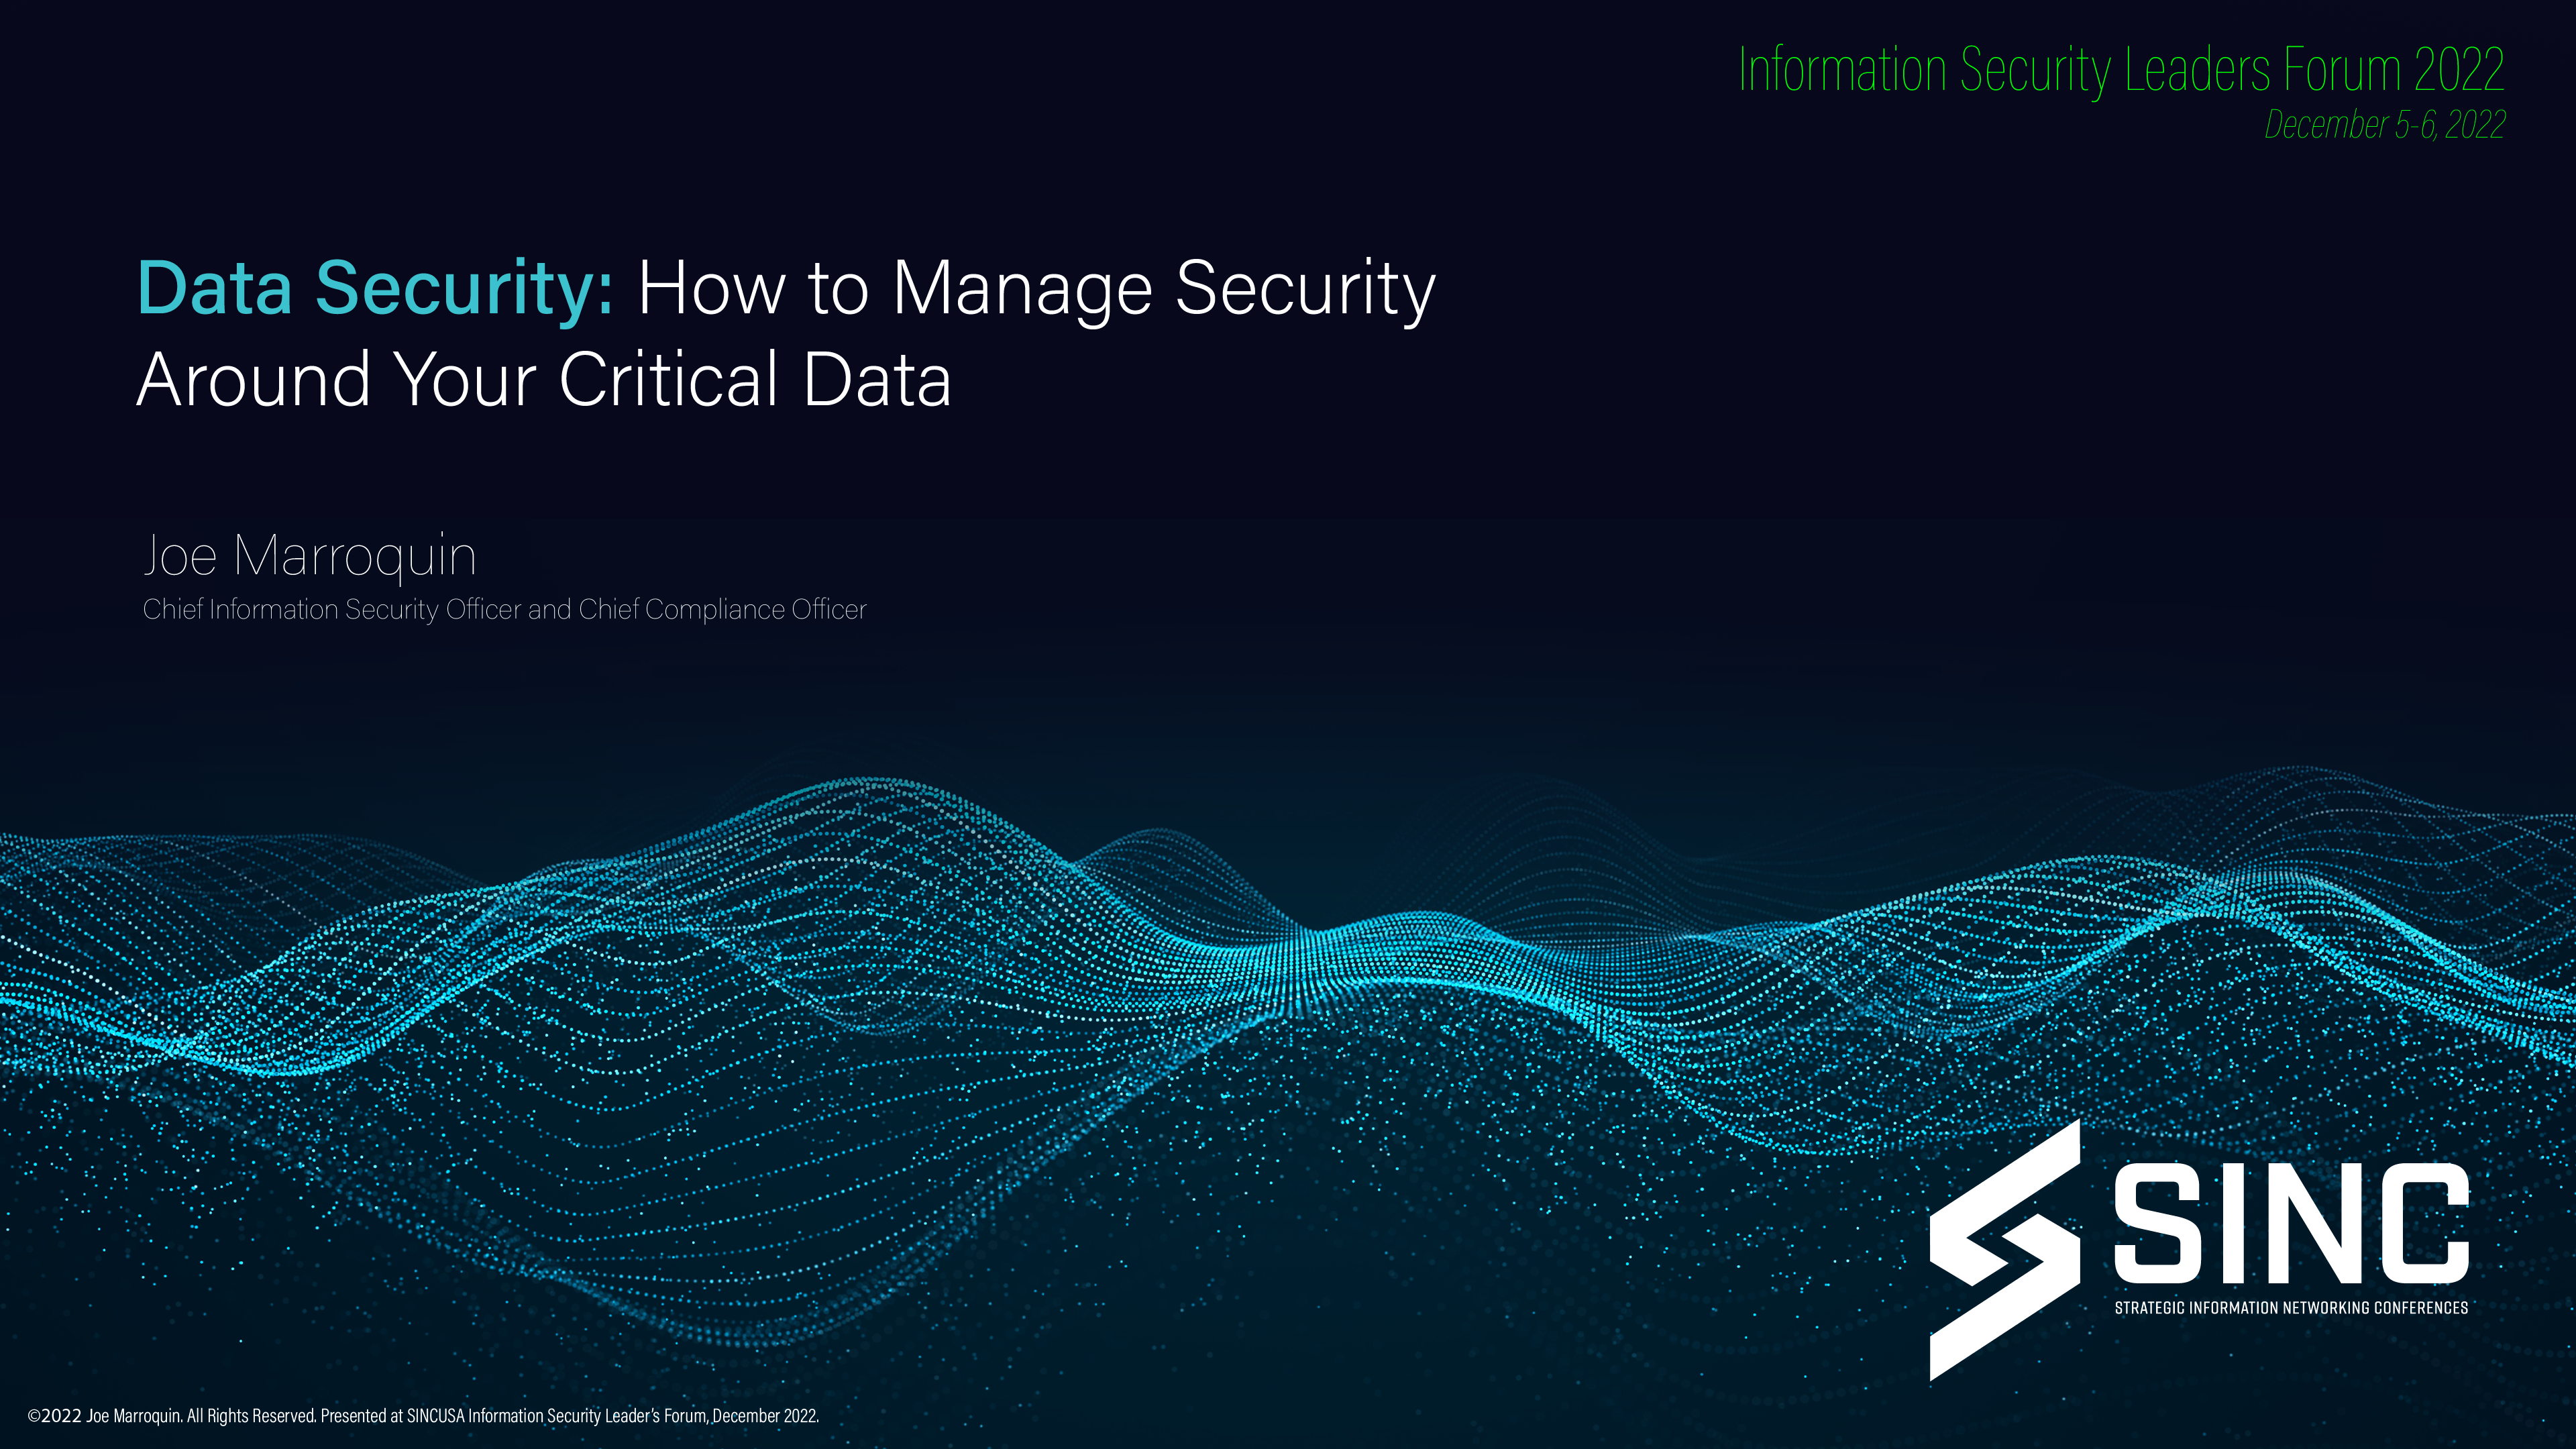 Keynote: How to Manage Security Around Your Critical Data